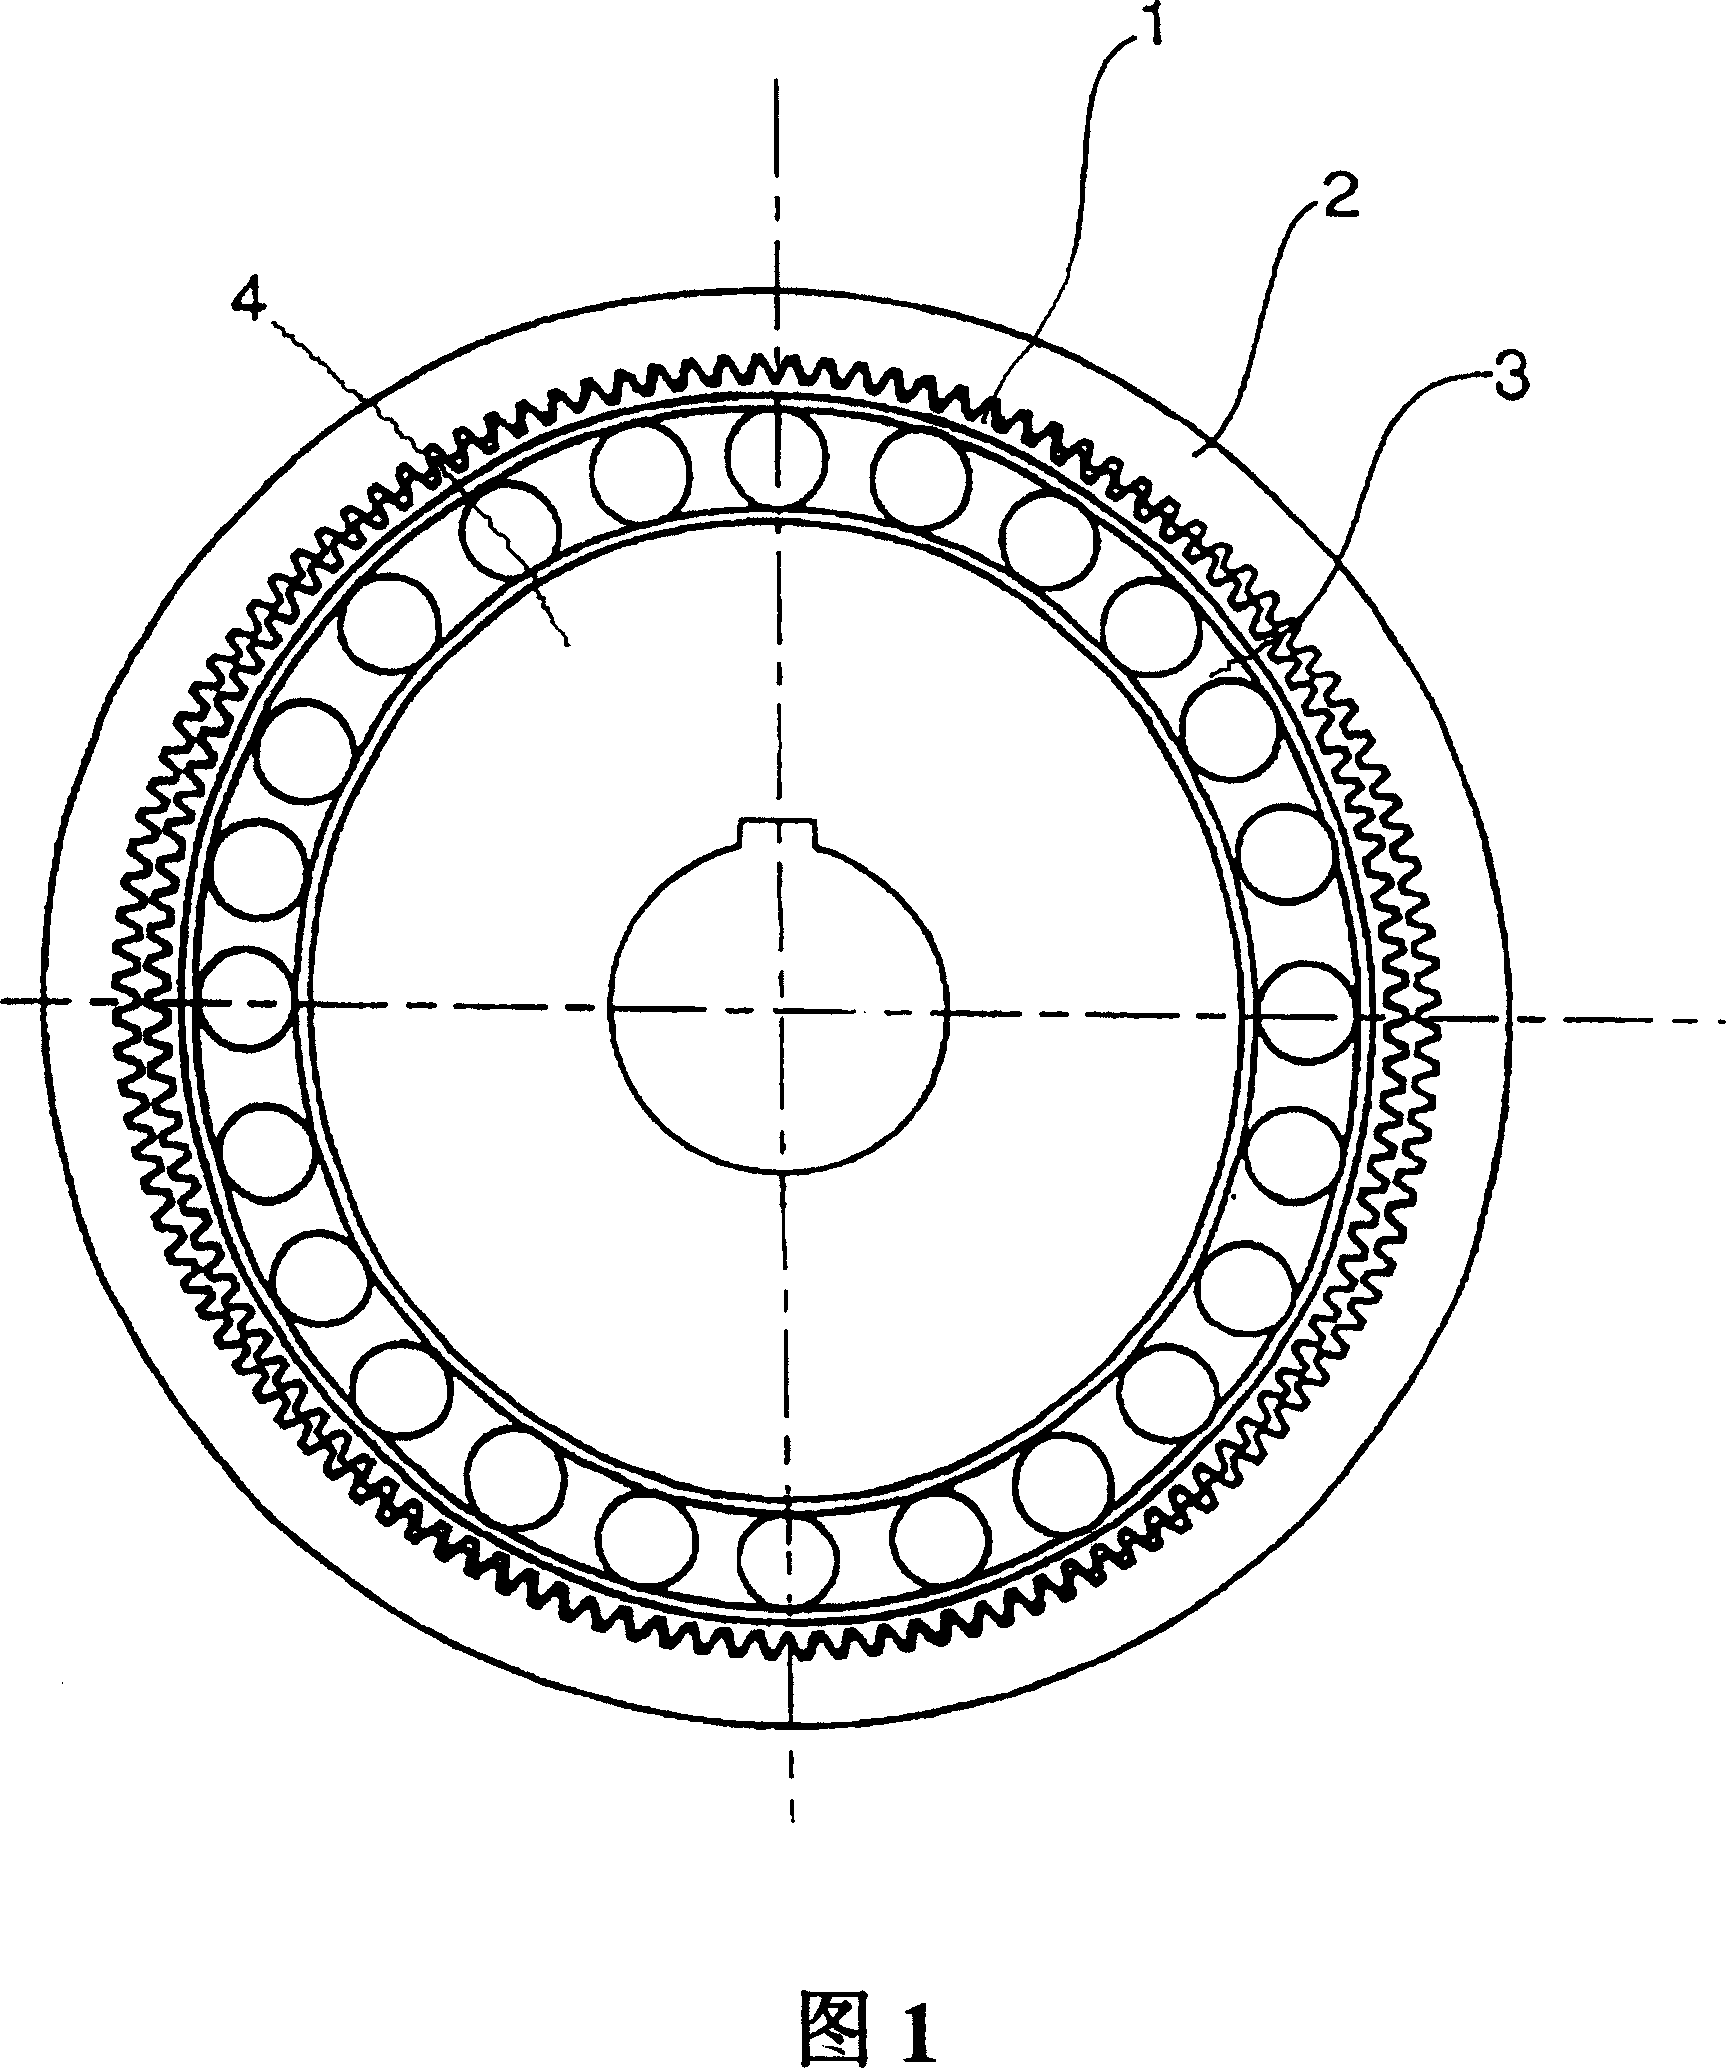 Three-dimensional harmonic wave gear with involute tooth outline